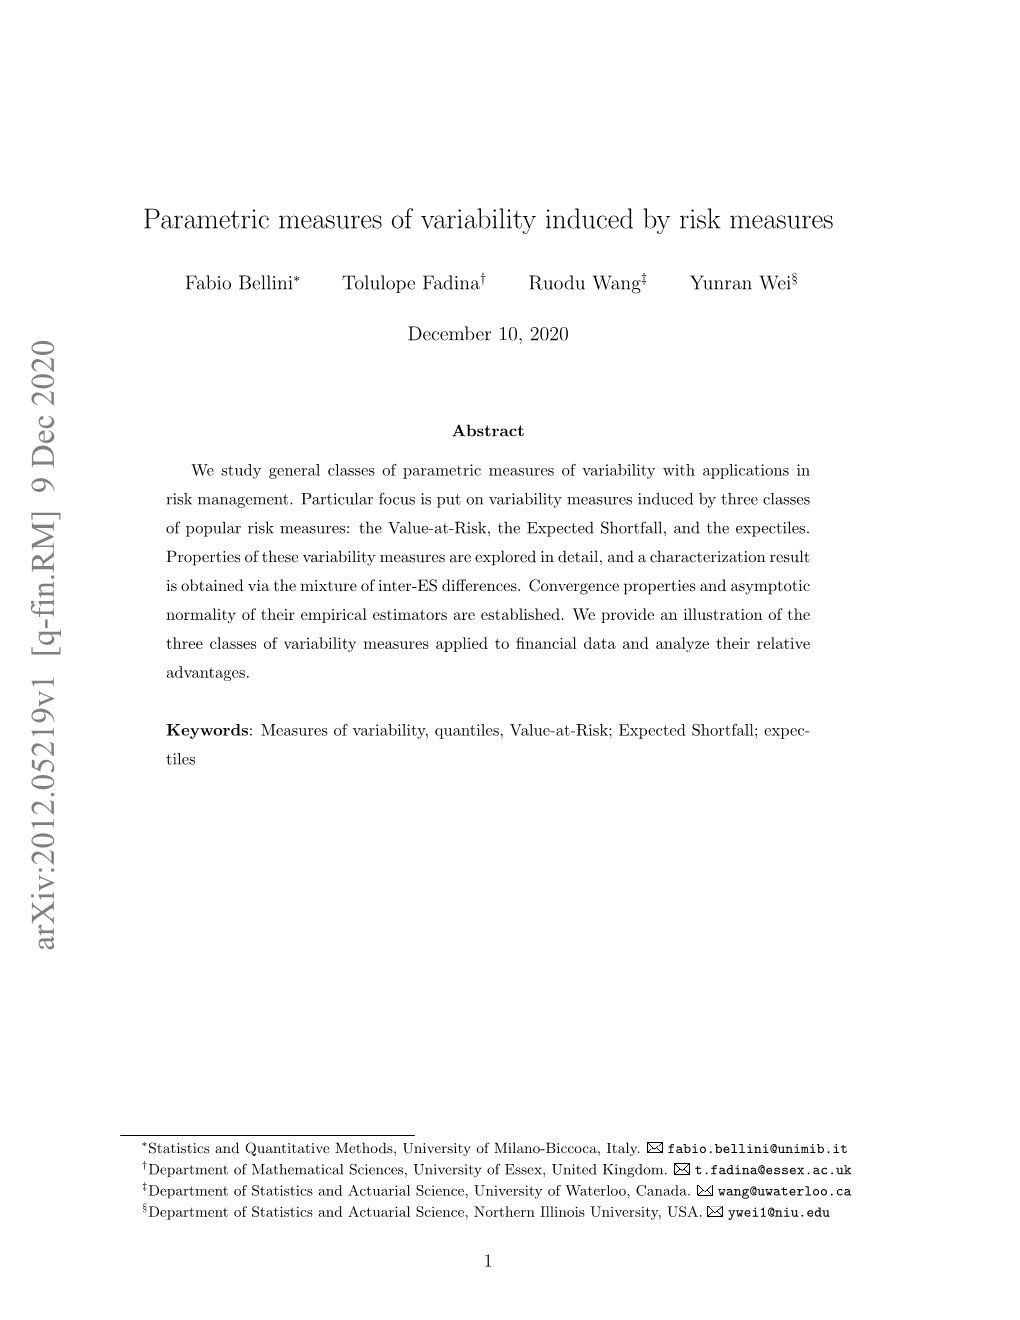 Parametric Measures of Variability Induced by Risk Measures